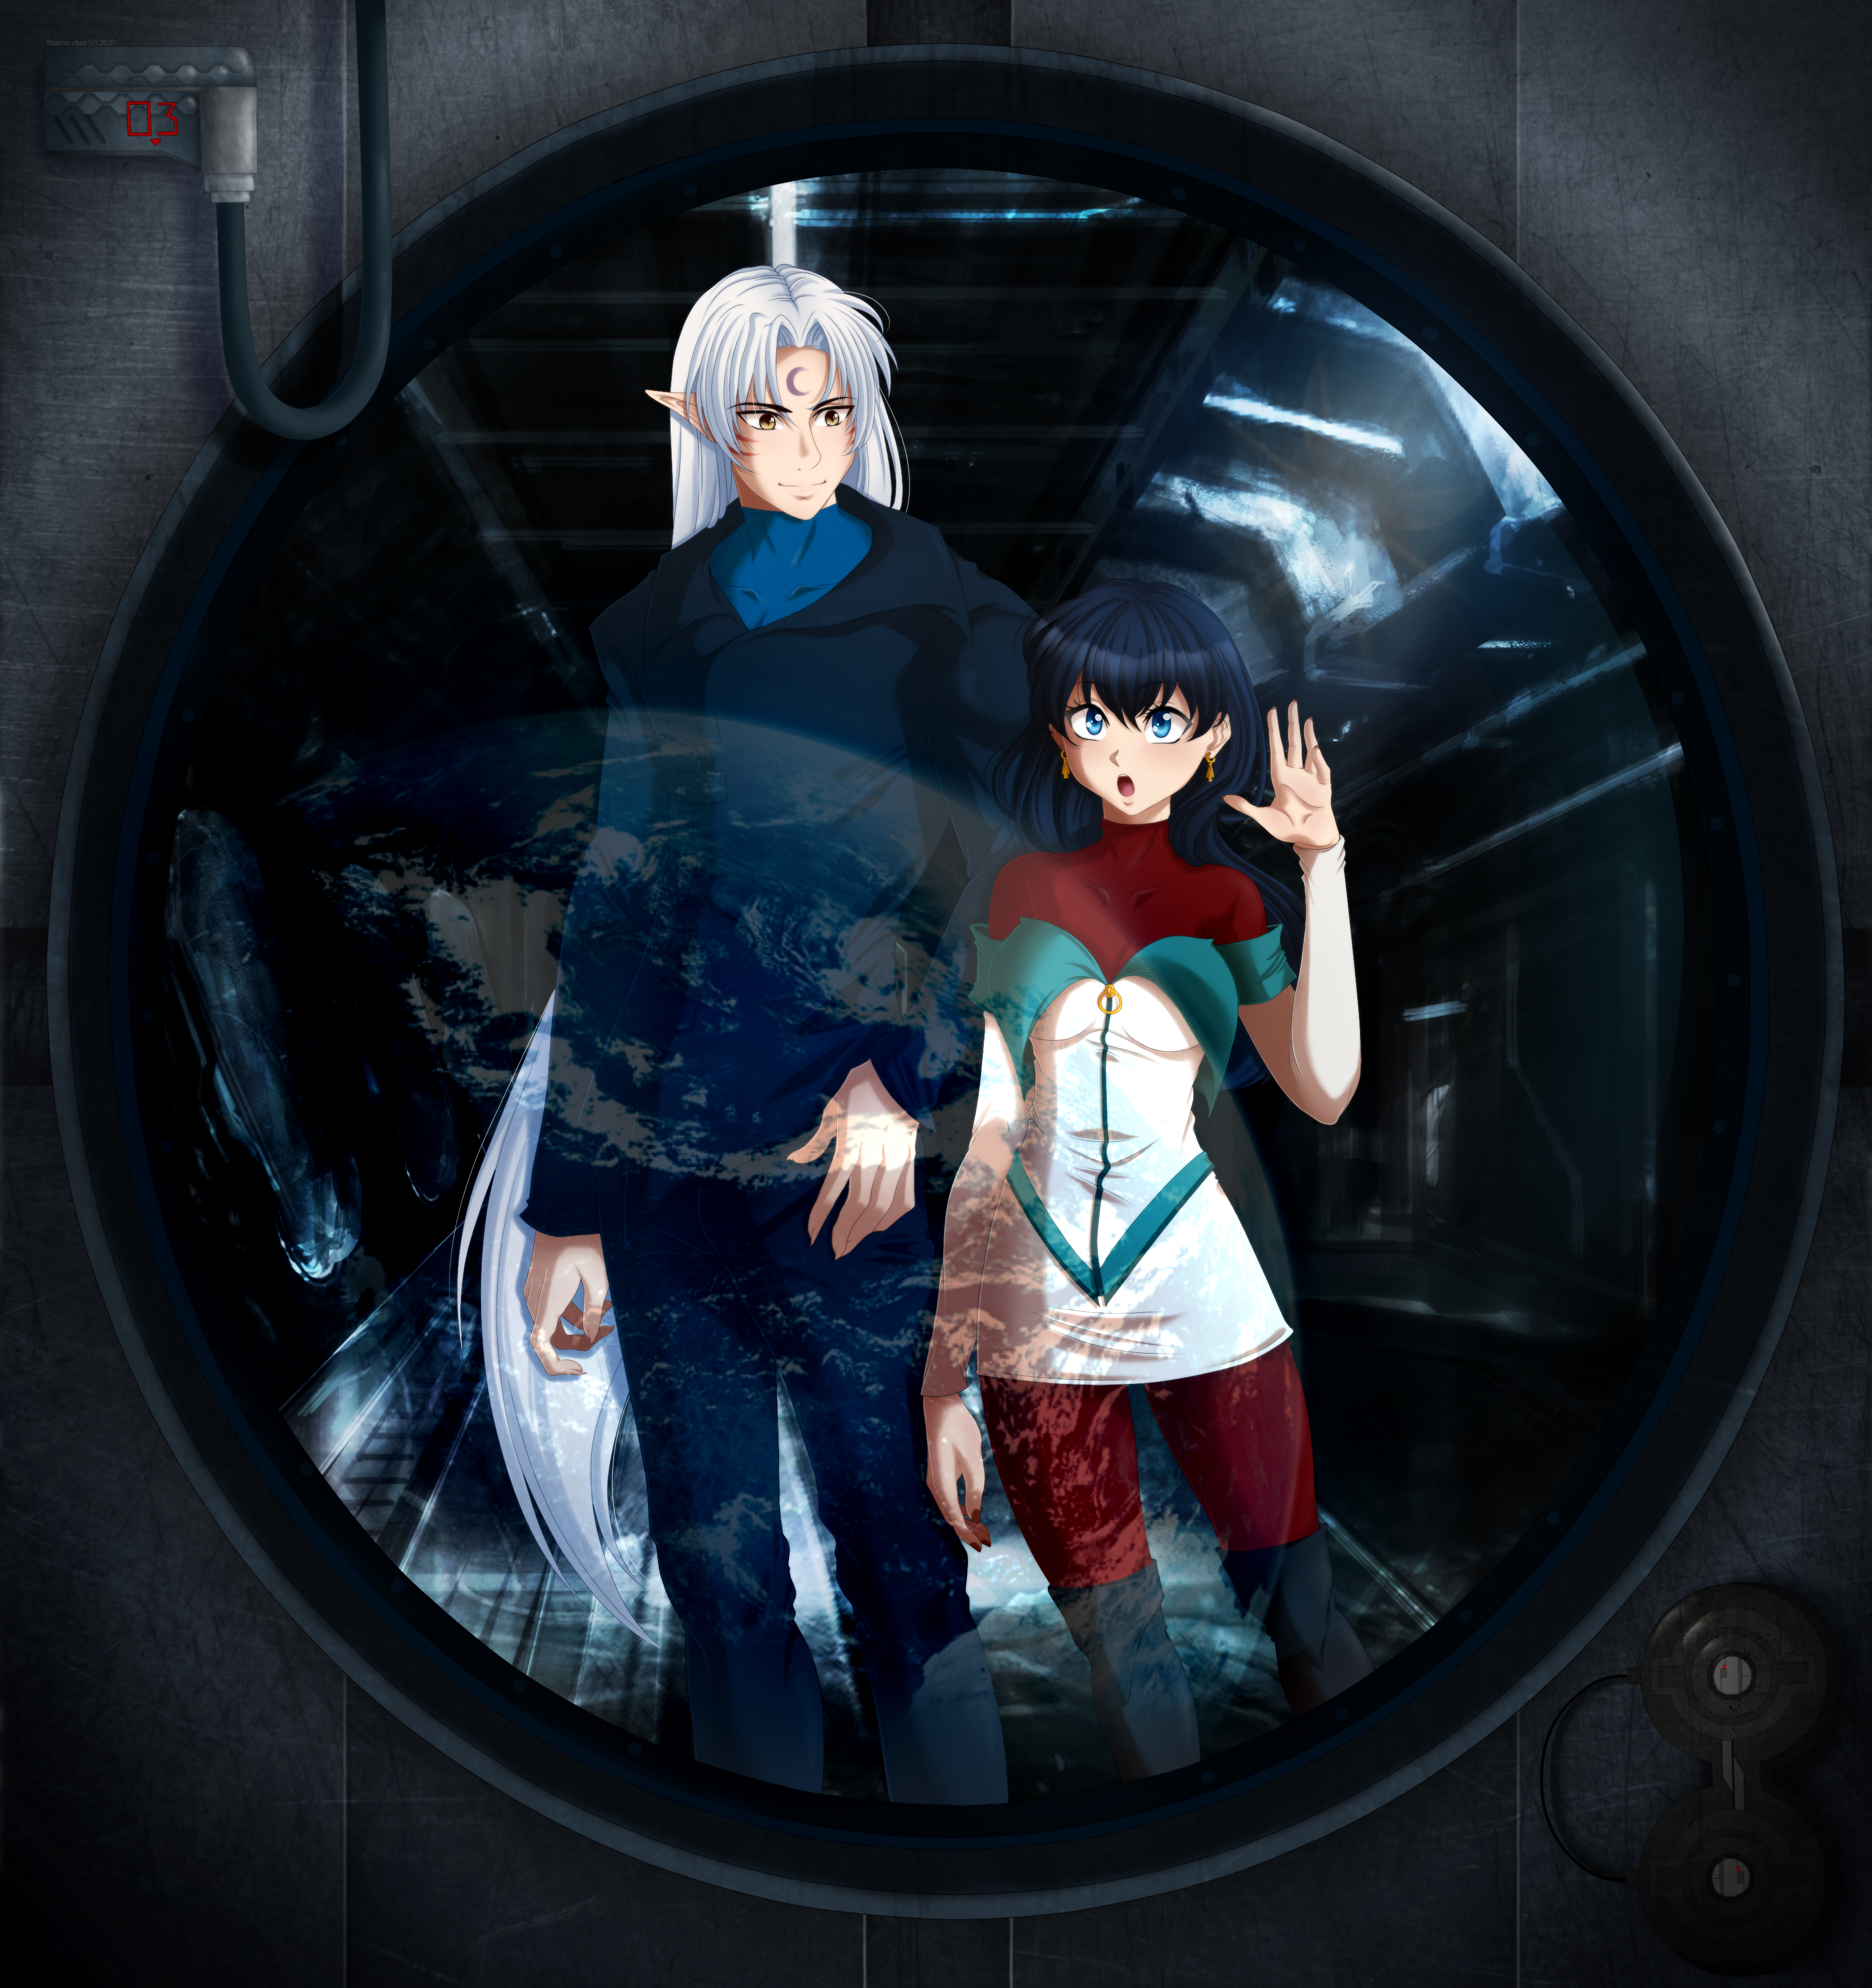 Does this darkness have a name? — Moroha and Inuyasha's quarrel + Shippo is  finally